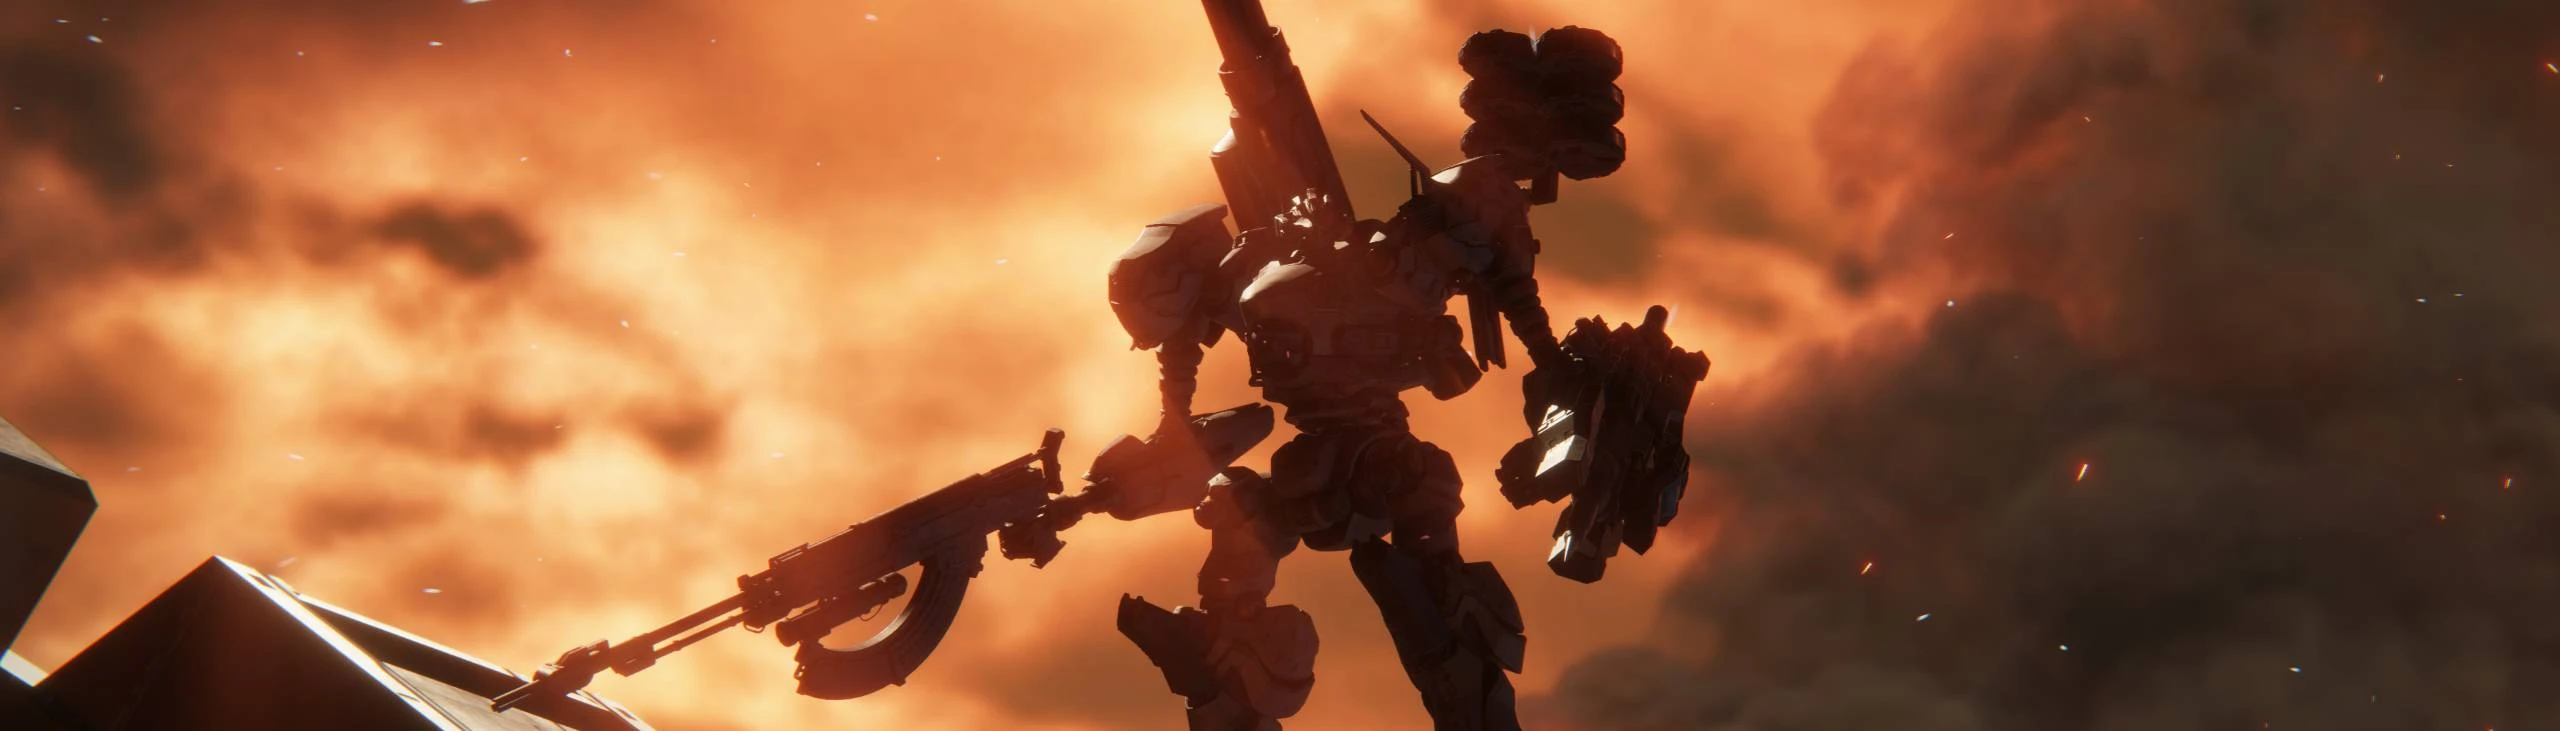 Armored Core 6's game engine is great news for mods